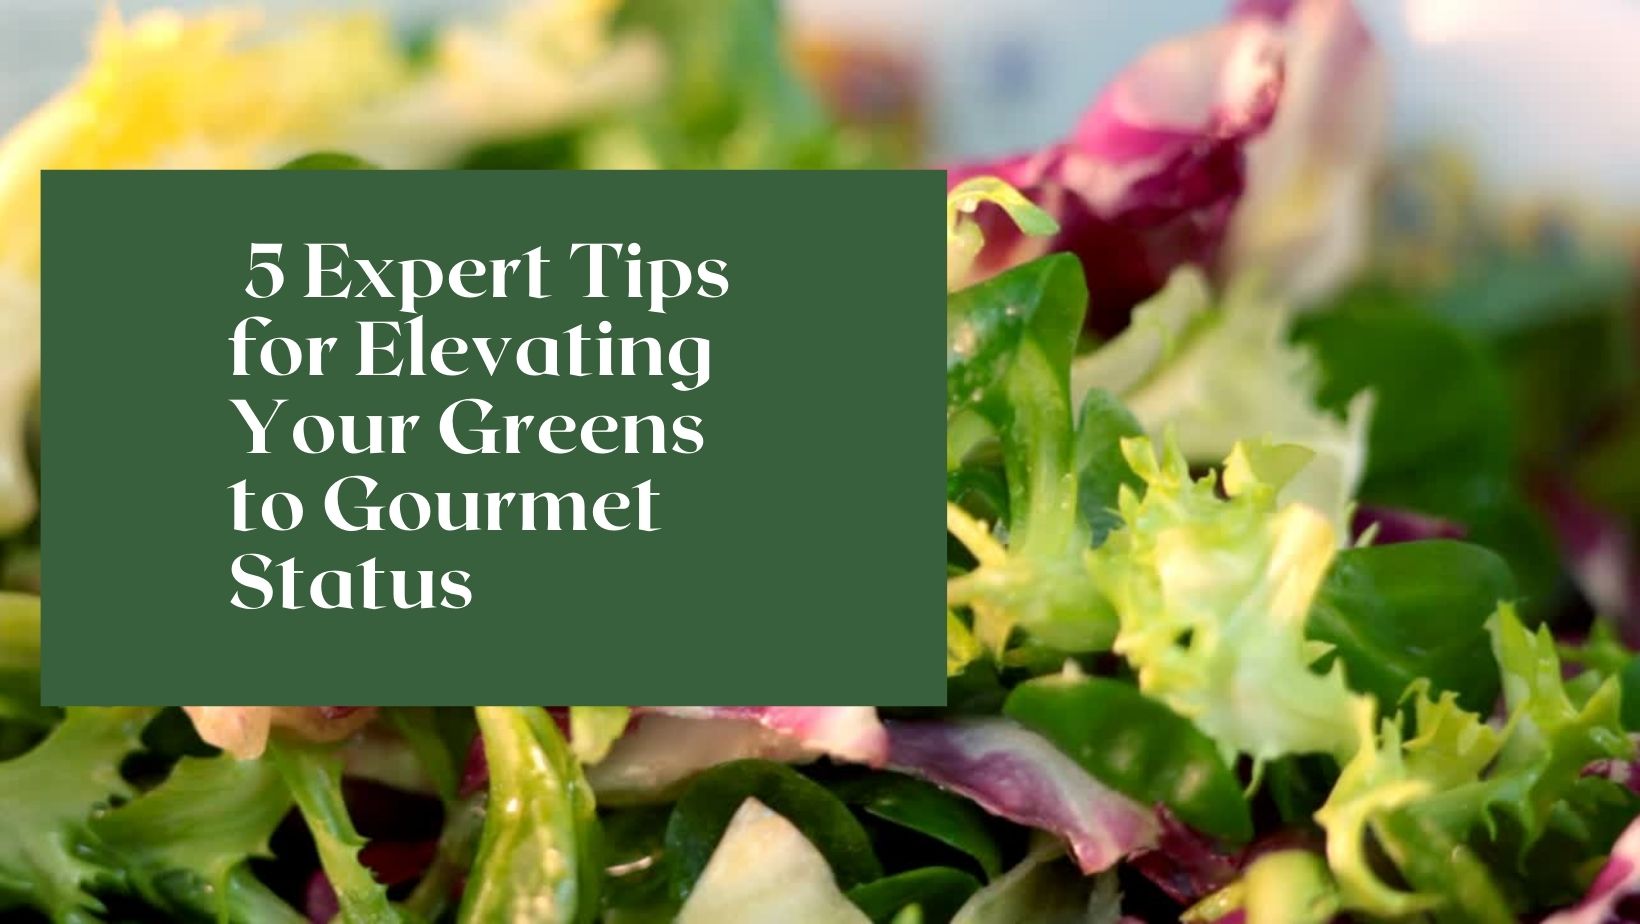 Slay Your Salad Game: 5 Expert Tips for Elevating Your Greens to Gourmet Status